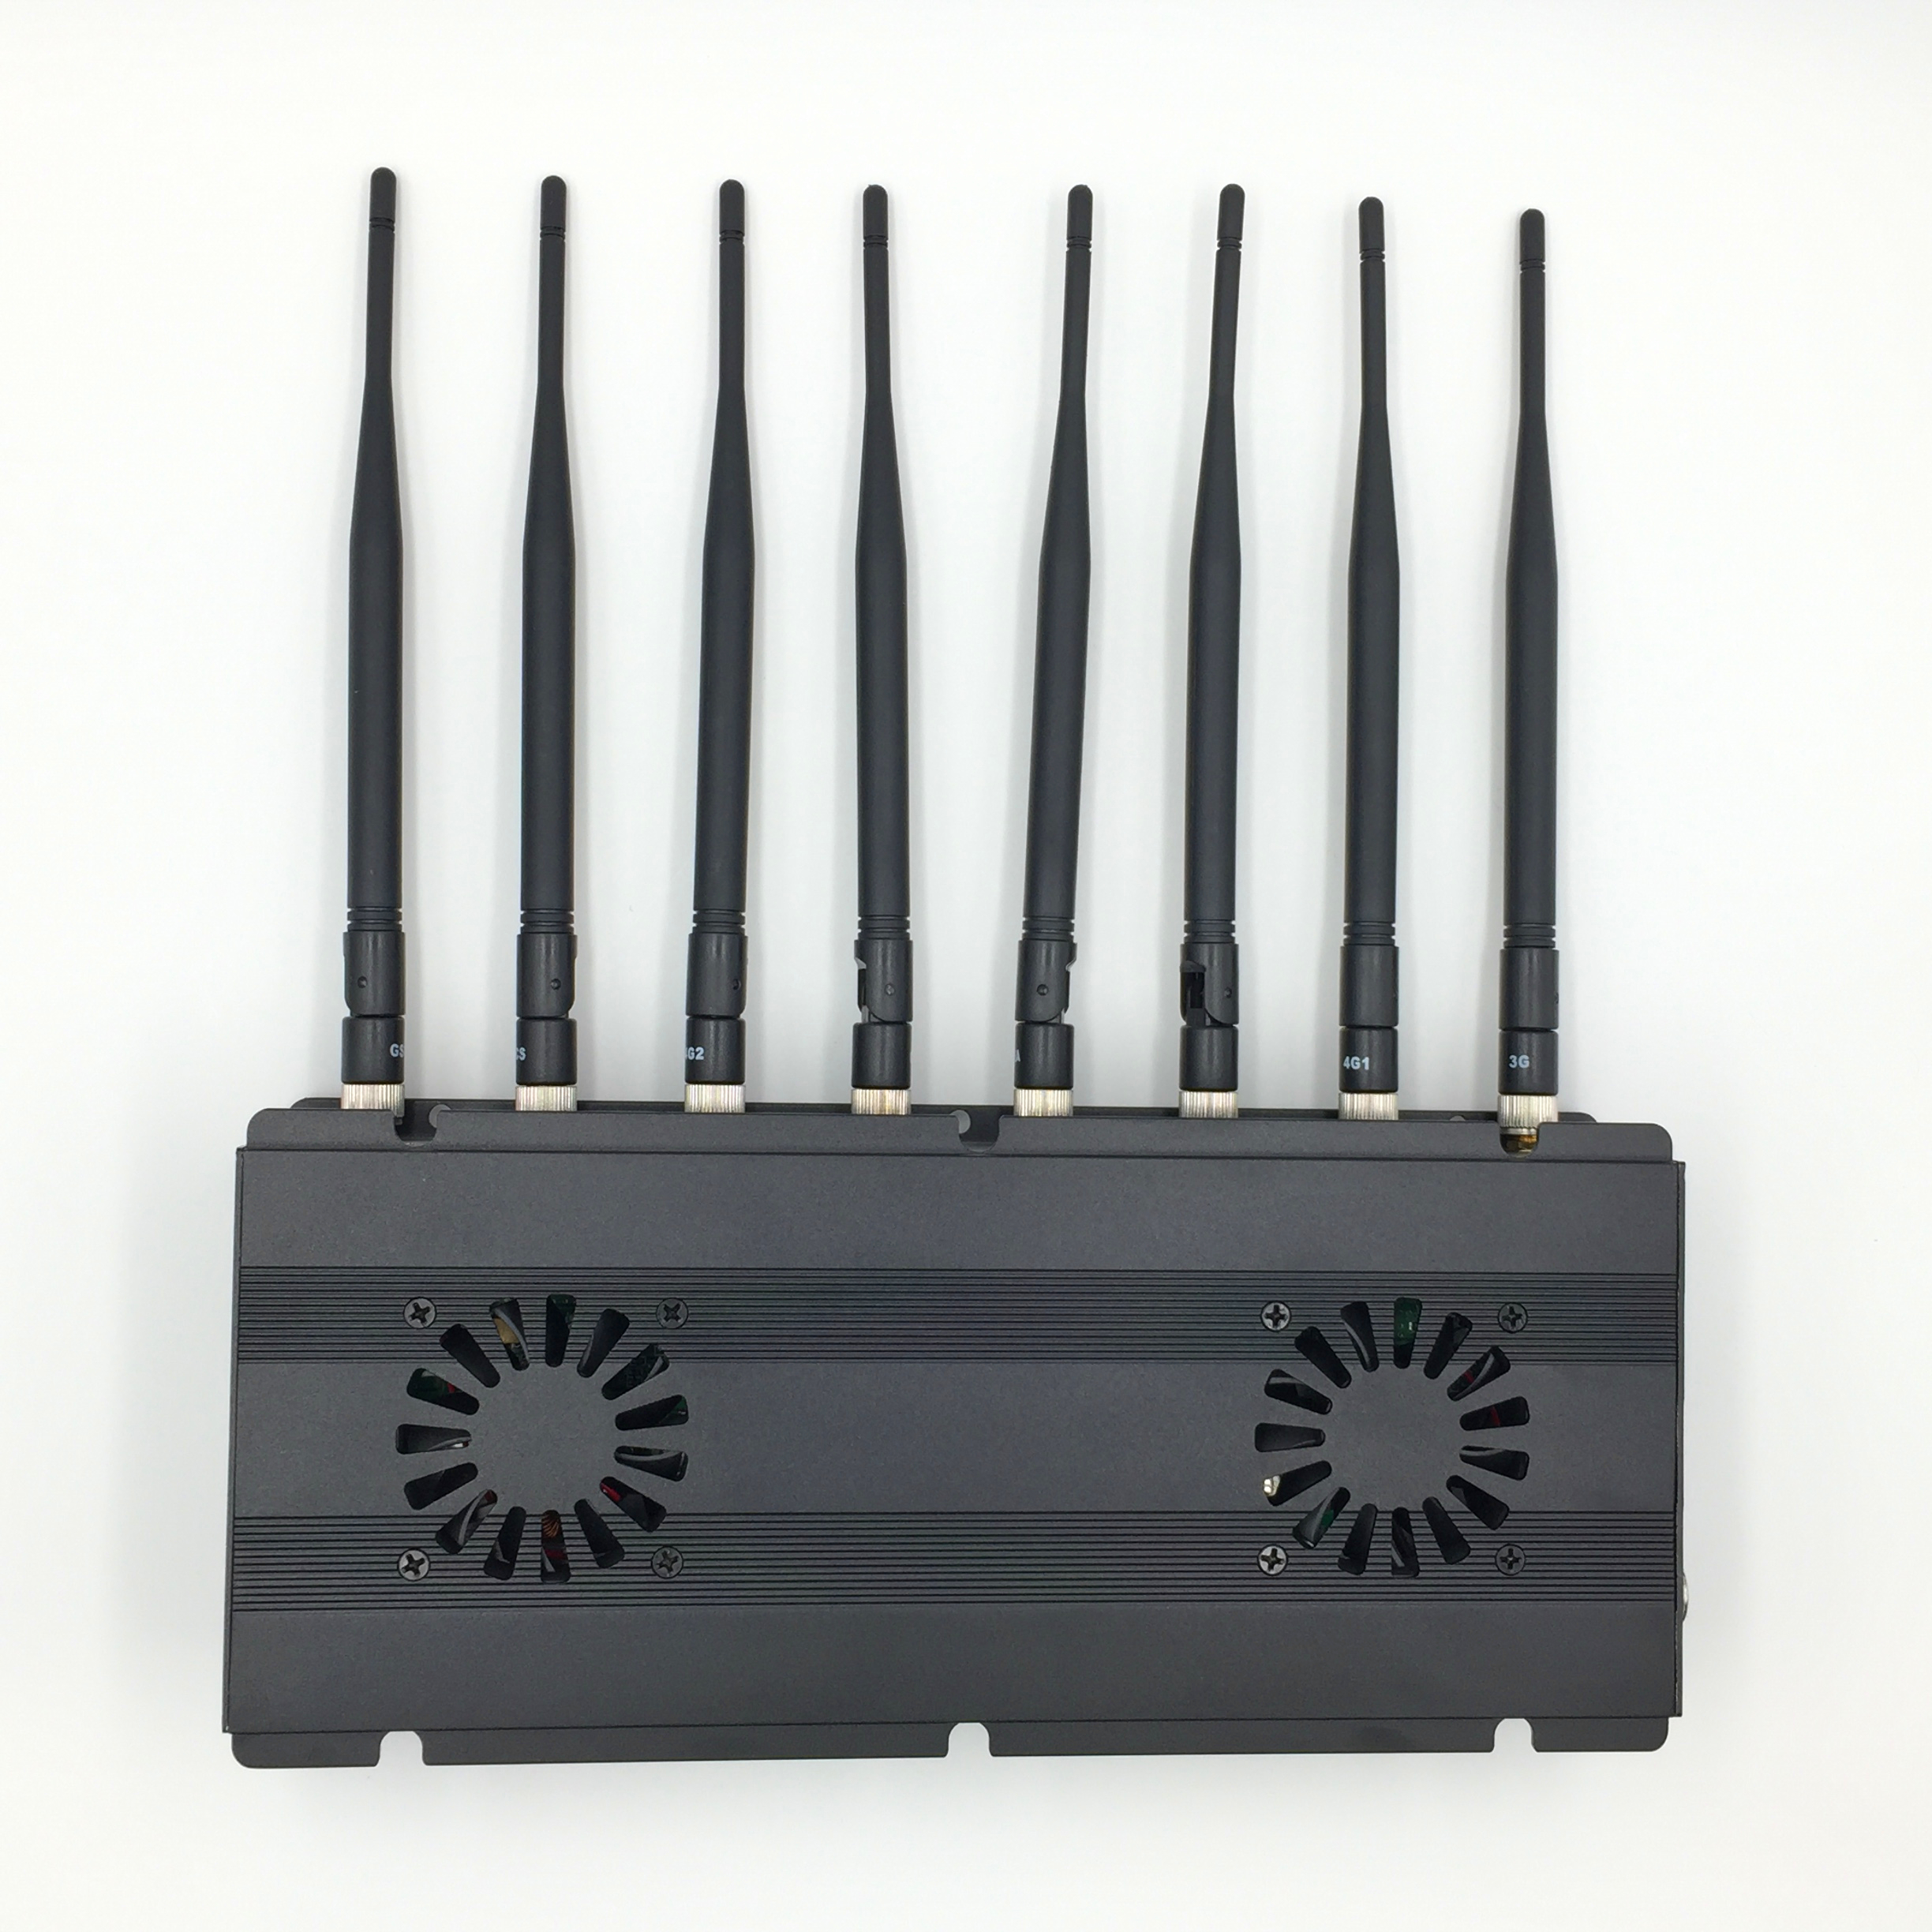 jammer kit lowes deck , Black Desktop 8 Antenna Signal Jammers With GSM 3G 4G GPS WiFi LOJACK